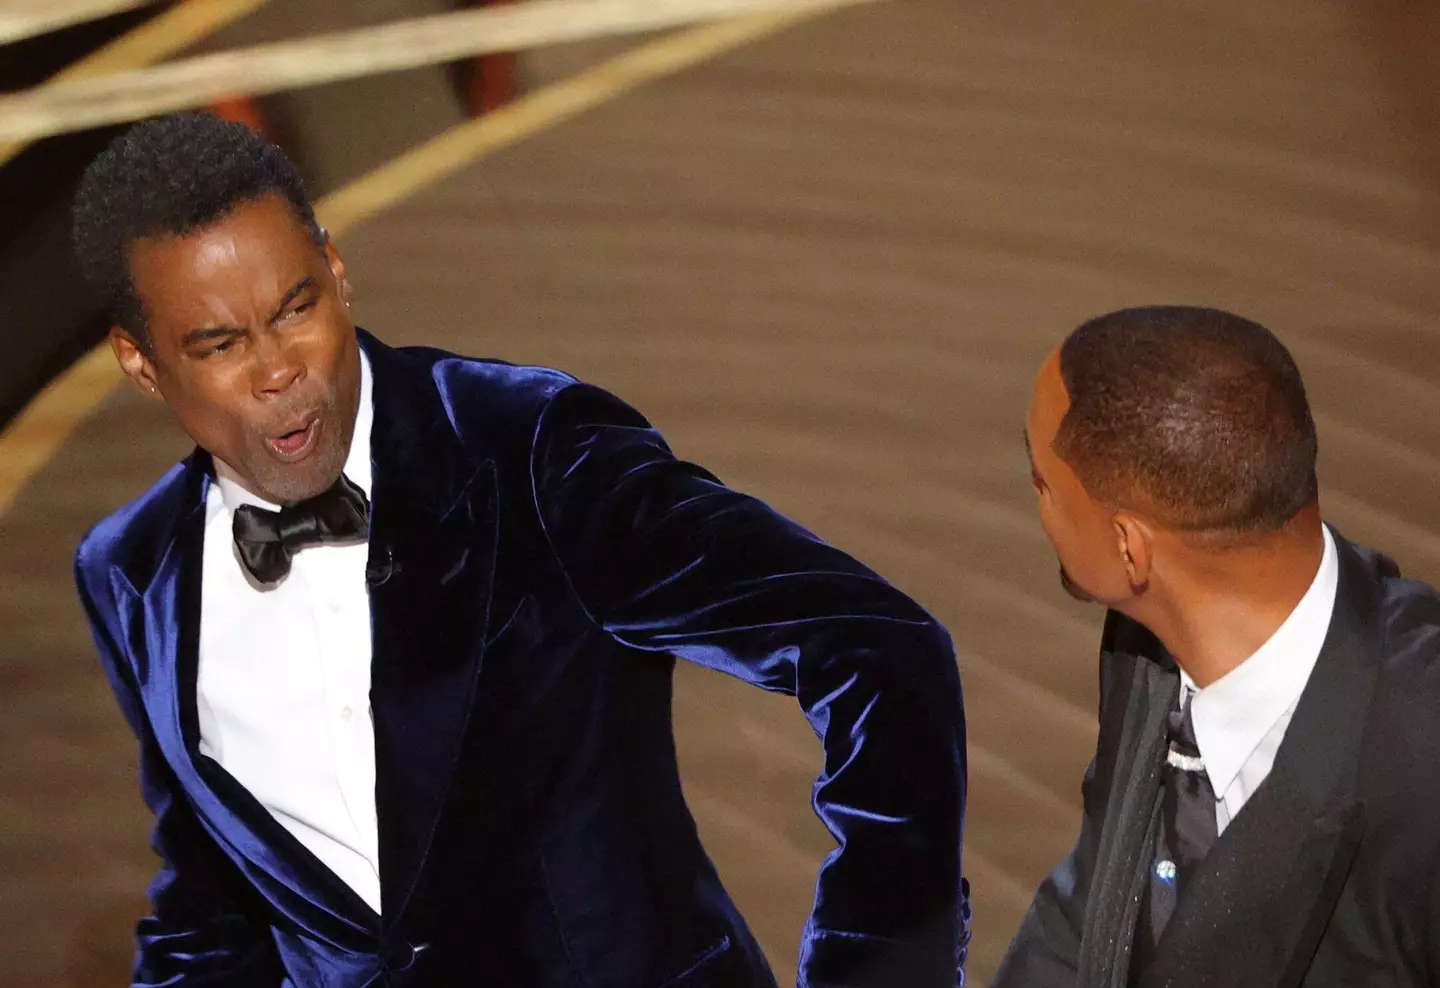 Chris Rock spoke about his anger before being hit by Smith.